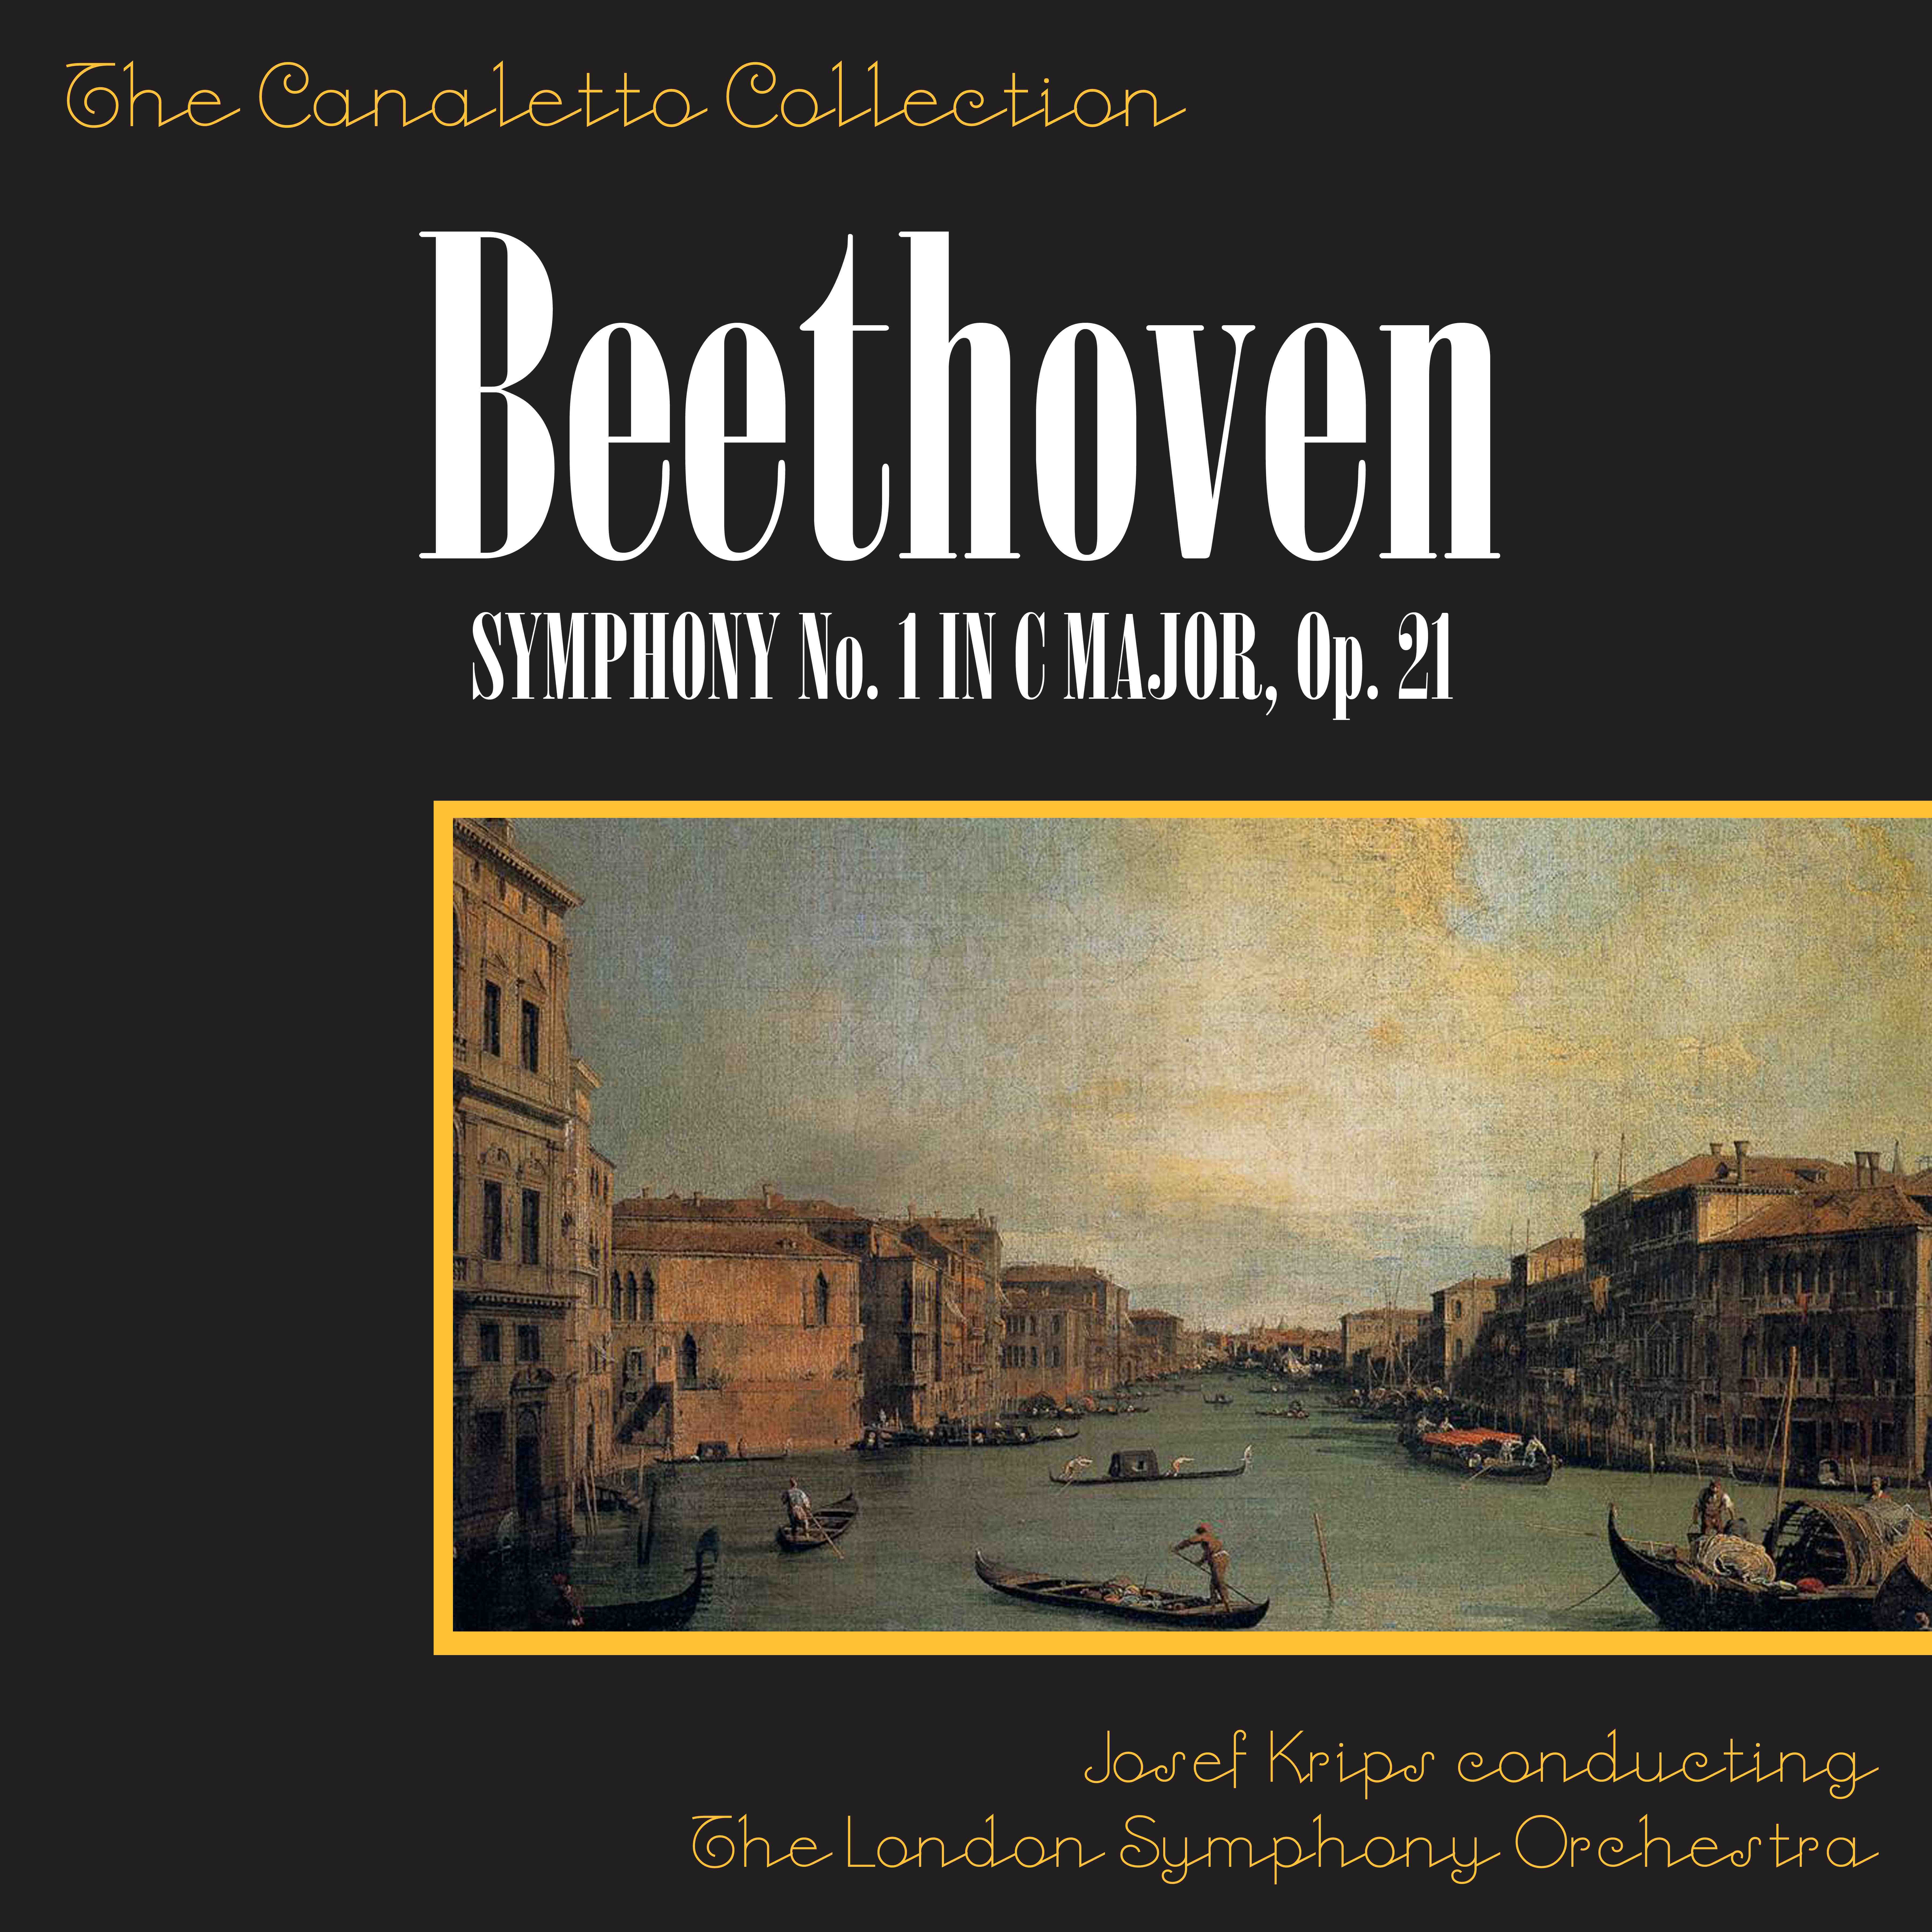 Beethoven: Symphony No. 1 In C Major, Op. 21: 2nd Movement - Andante Cantabile Con Moto